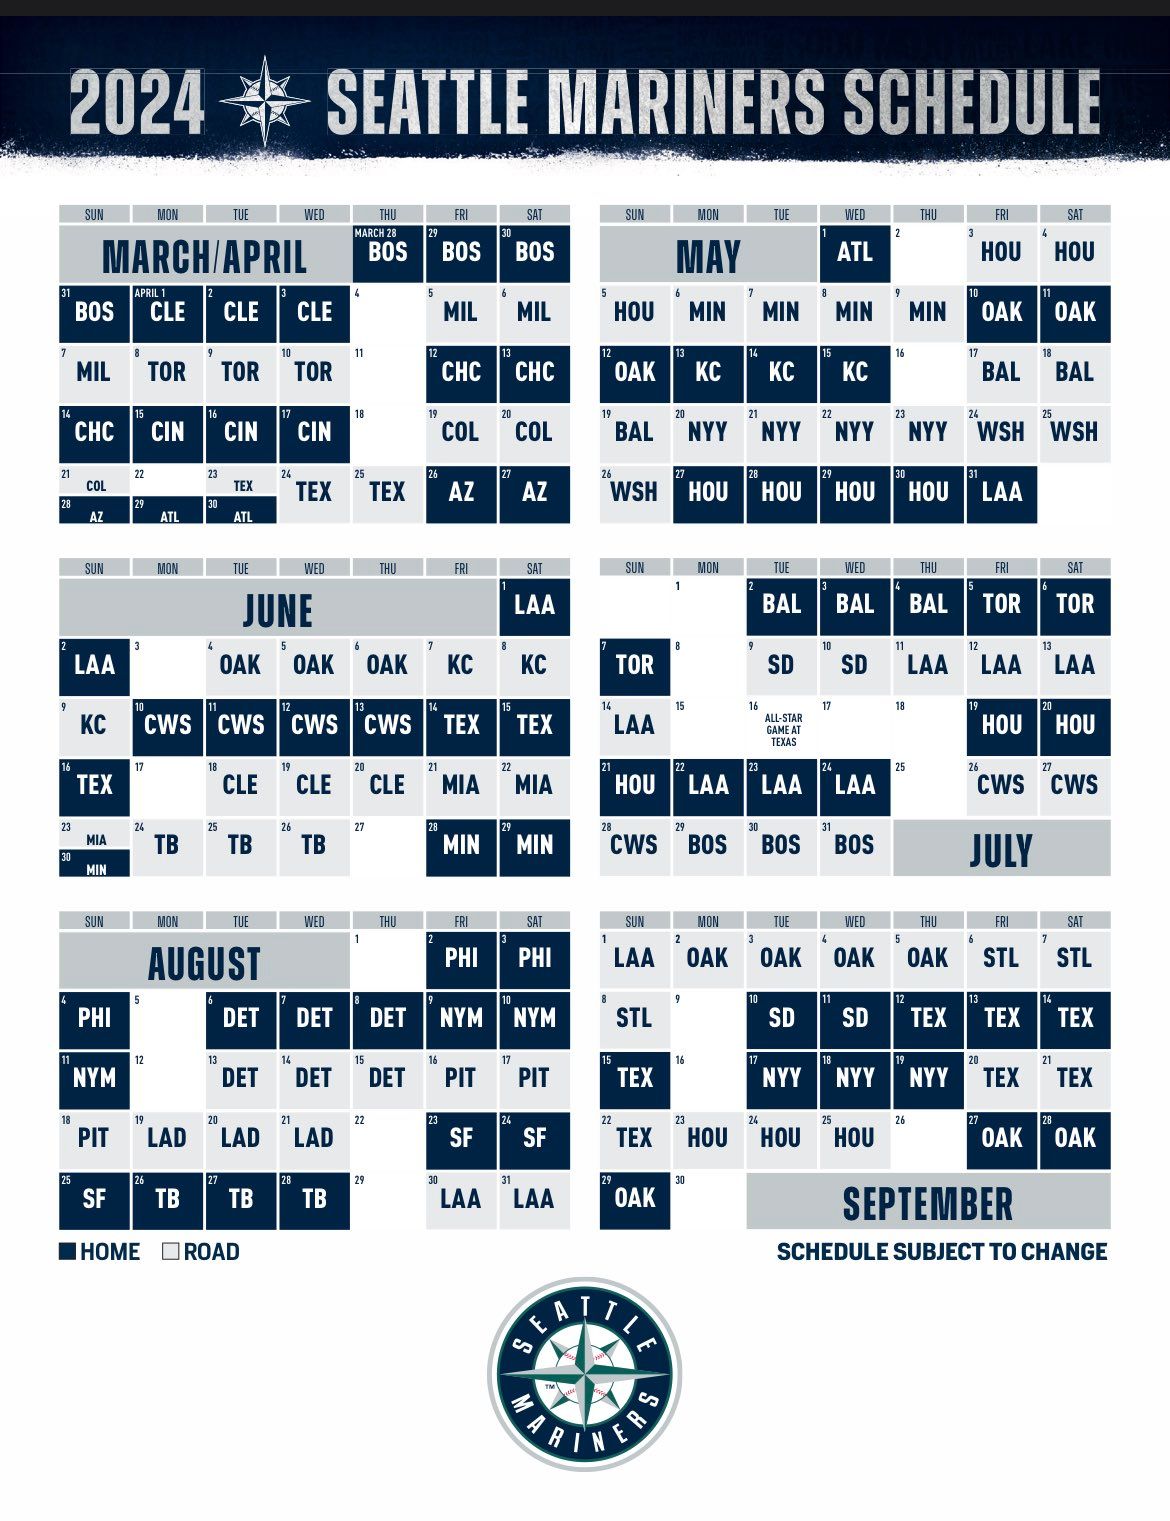 Mariners Announce Updated 2022 Schedule  by Mariners PR  From the Corner  of Edgar  Dave